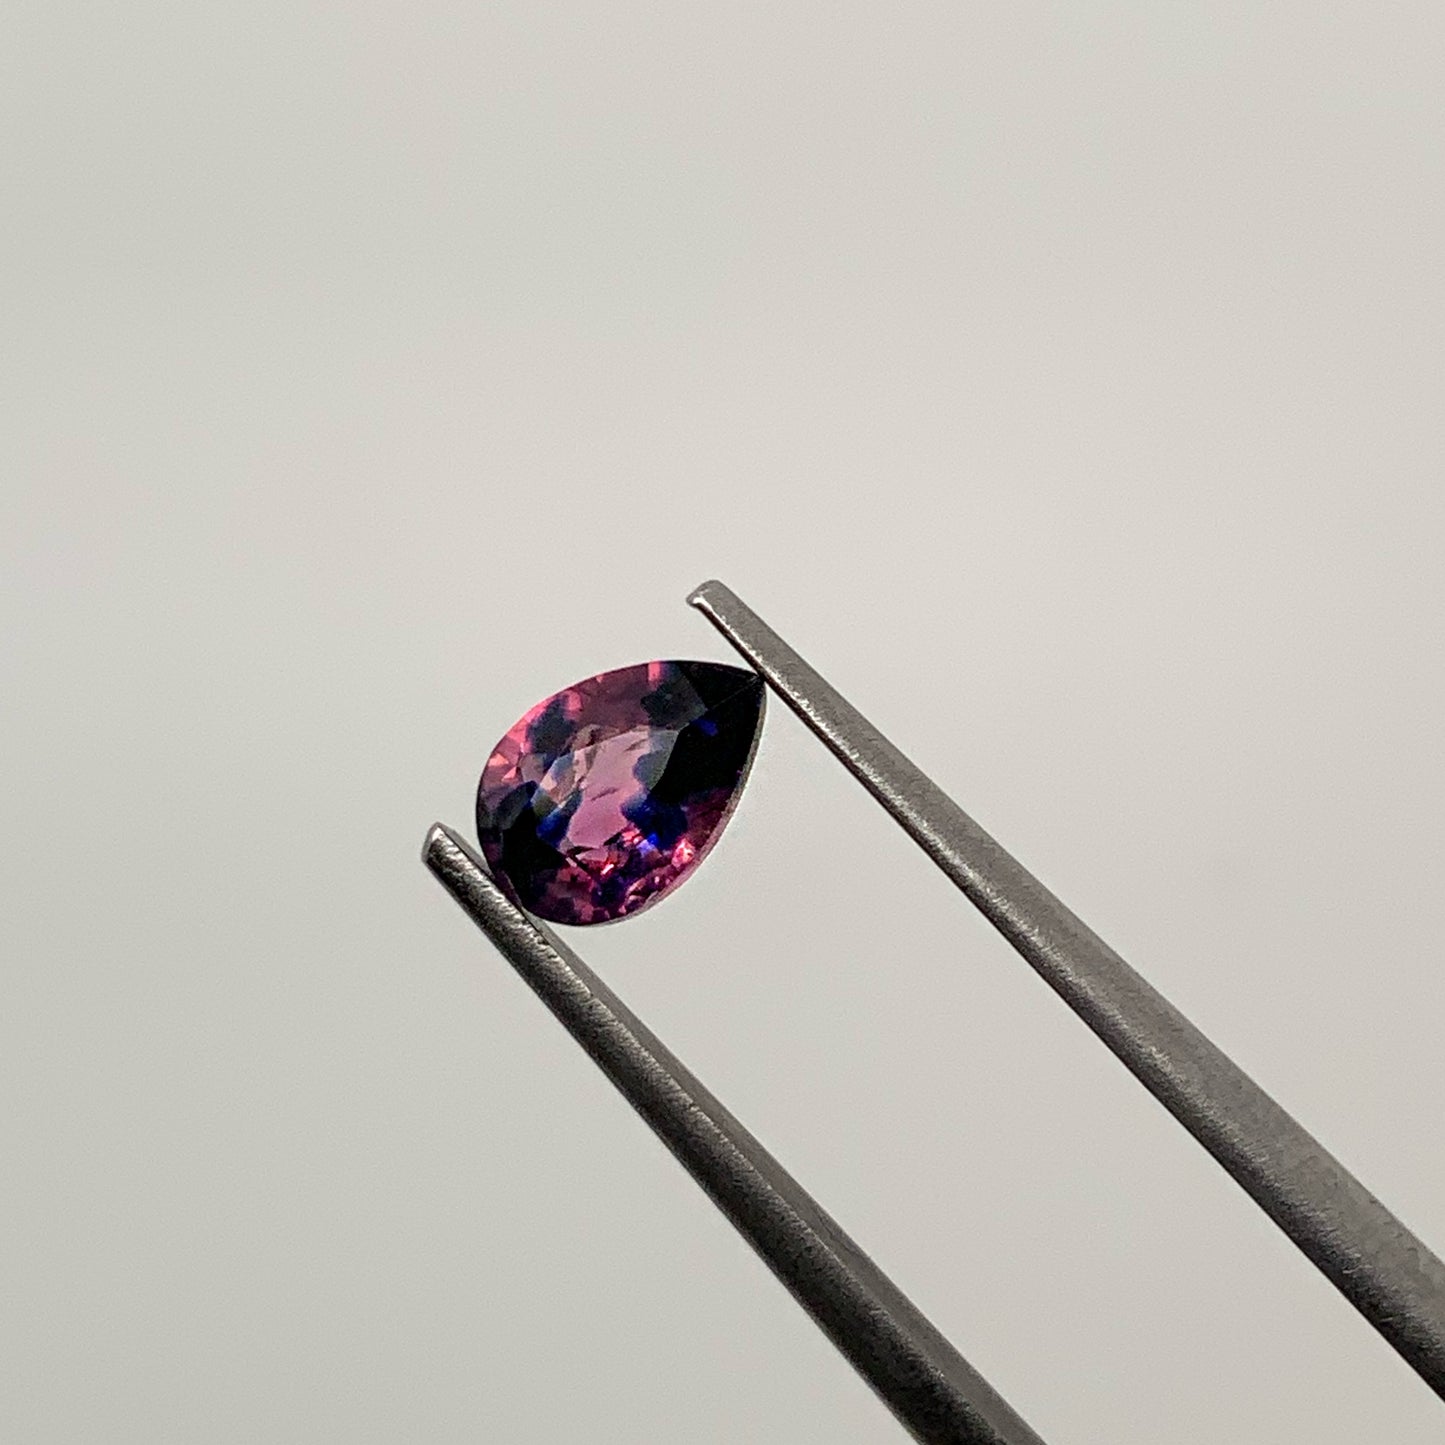 ADVANCE / SECTION Winza Sapphire Drop “C” of 0.56ct, total value 15,560 pesos